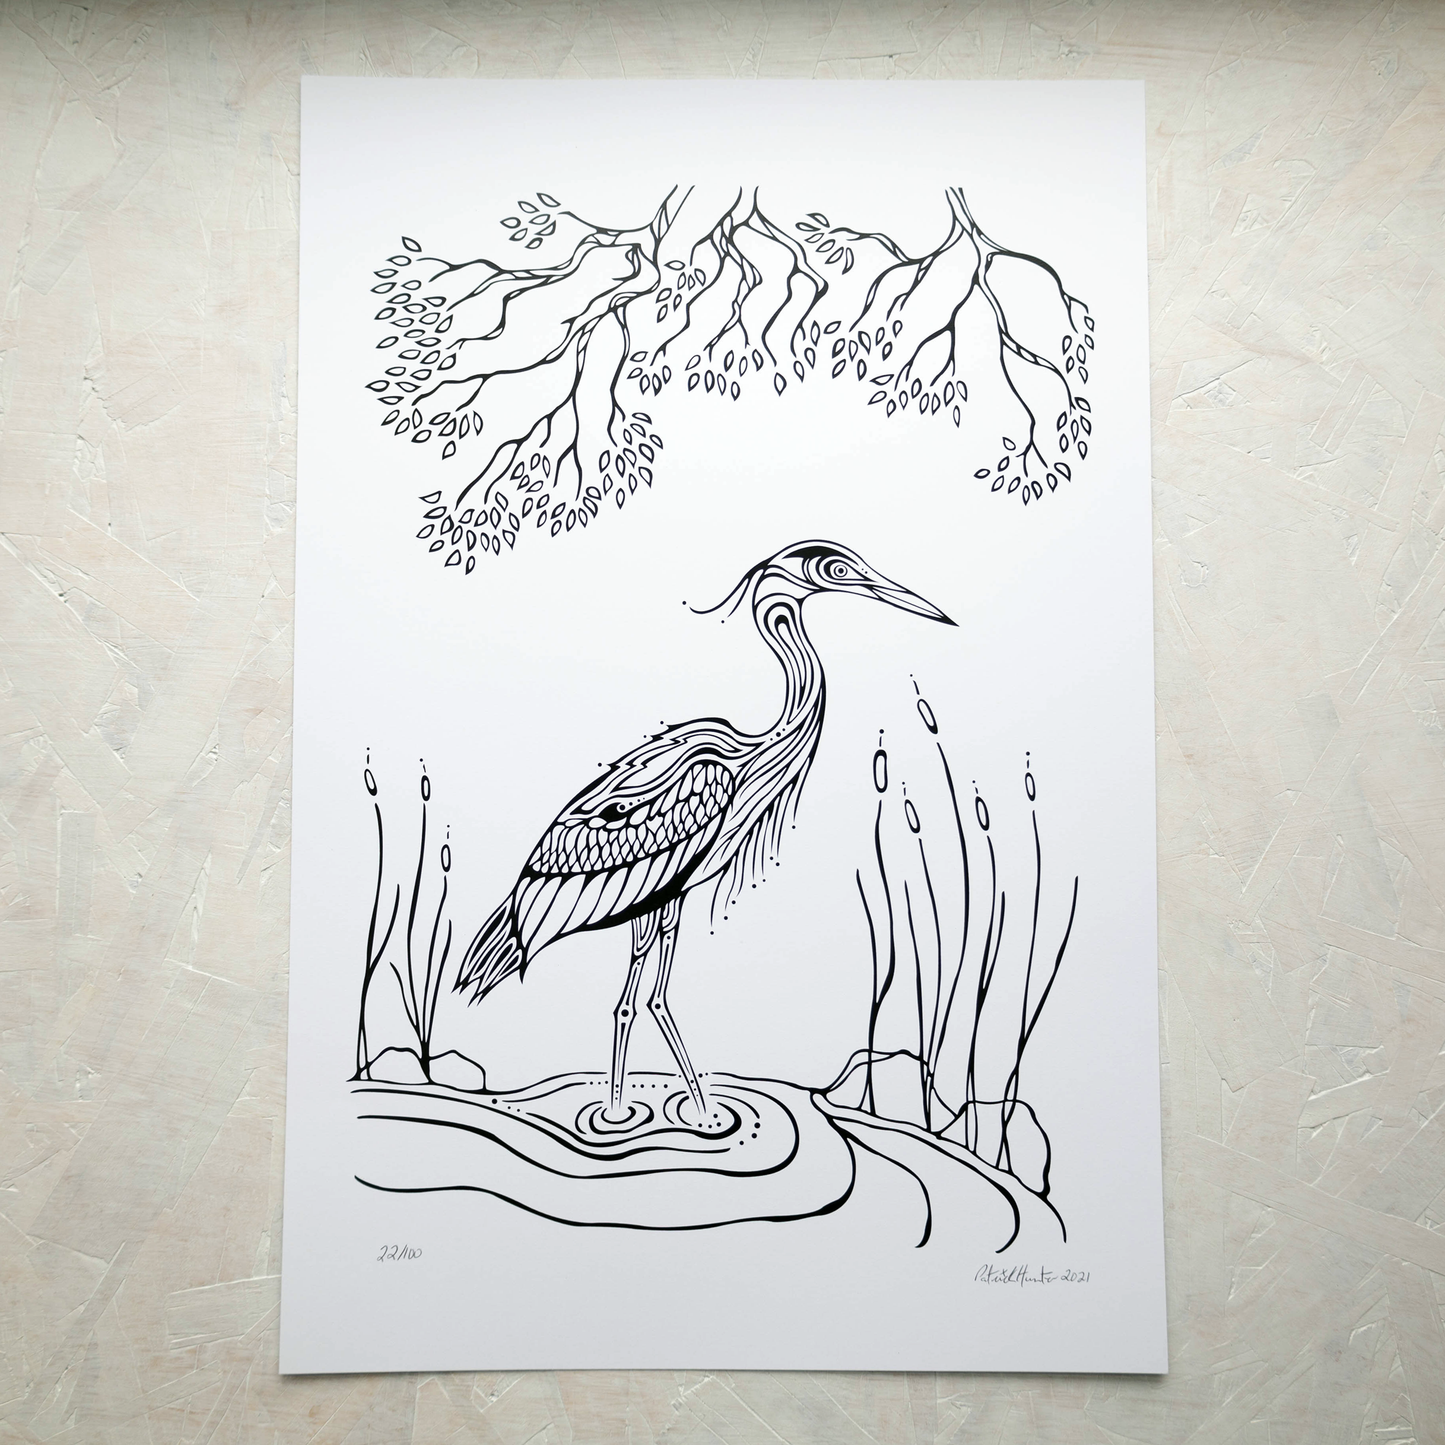 Print of Patrick Hunter's painting of a blue heron in woodland art style, black and white.